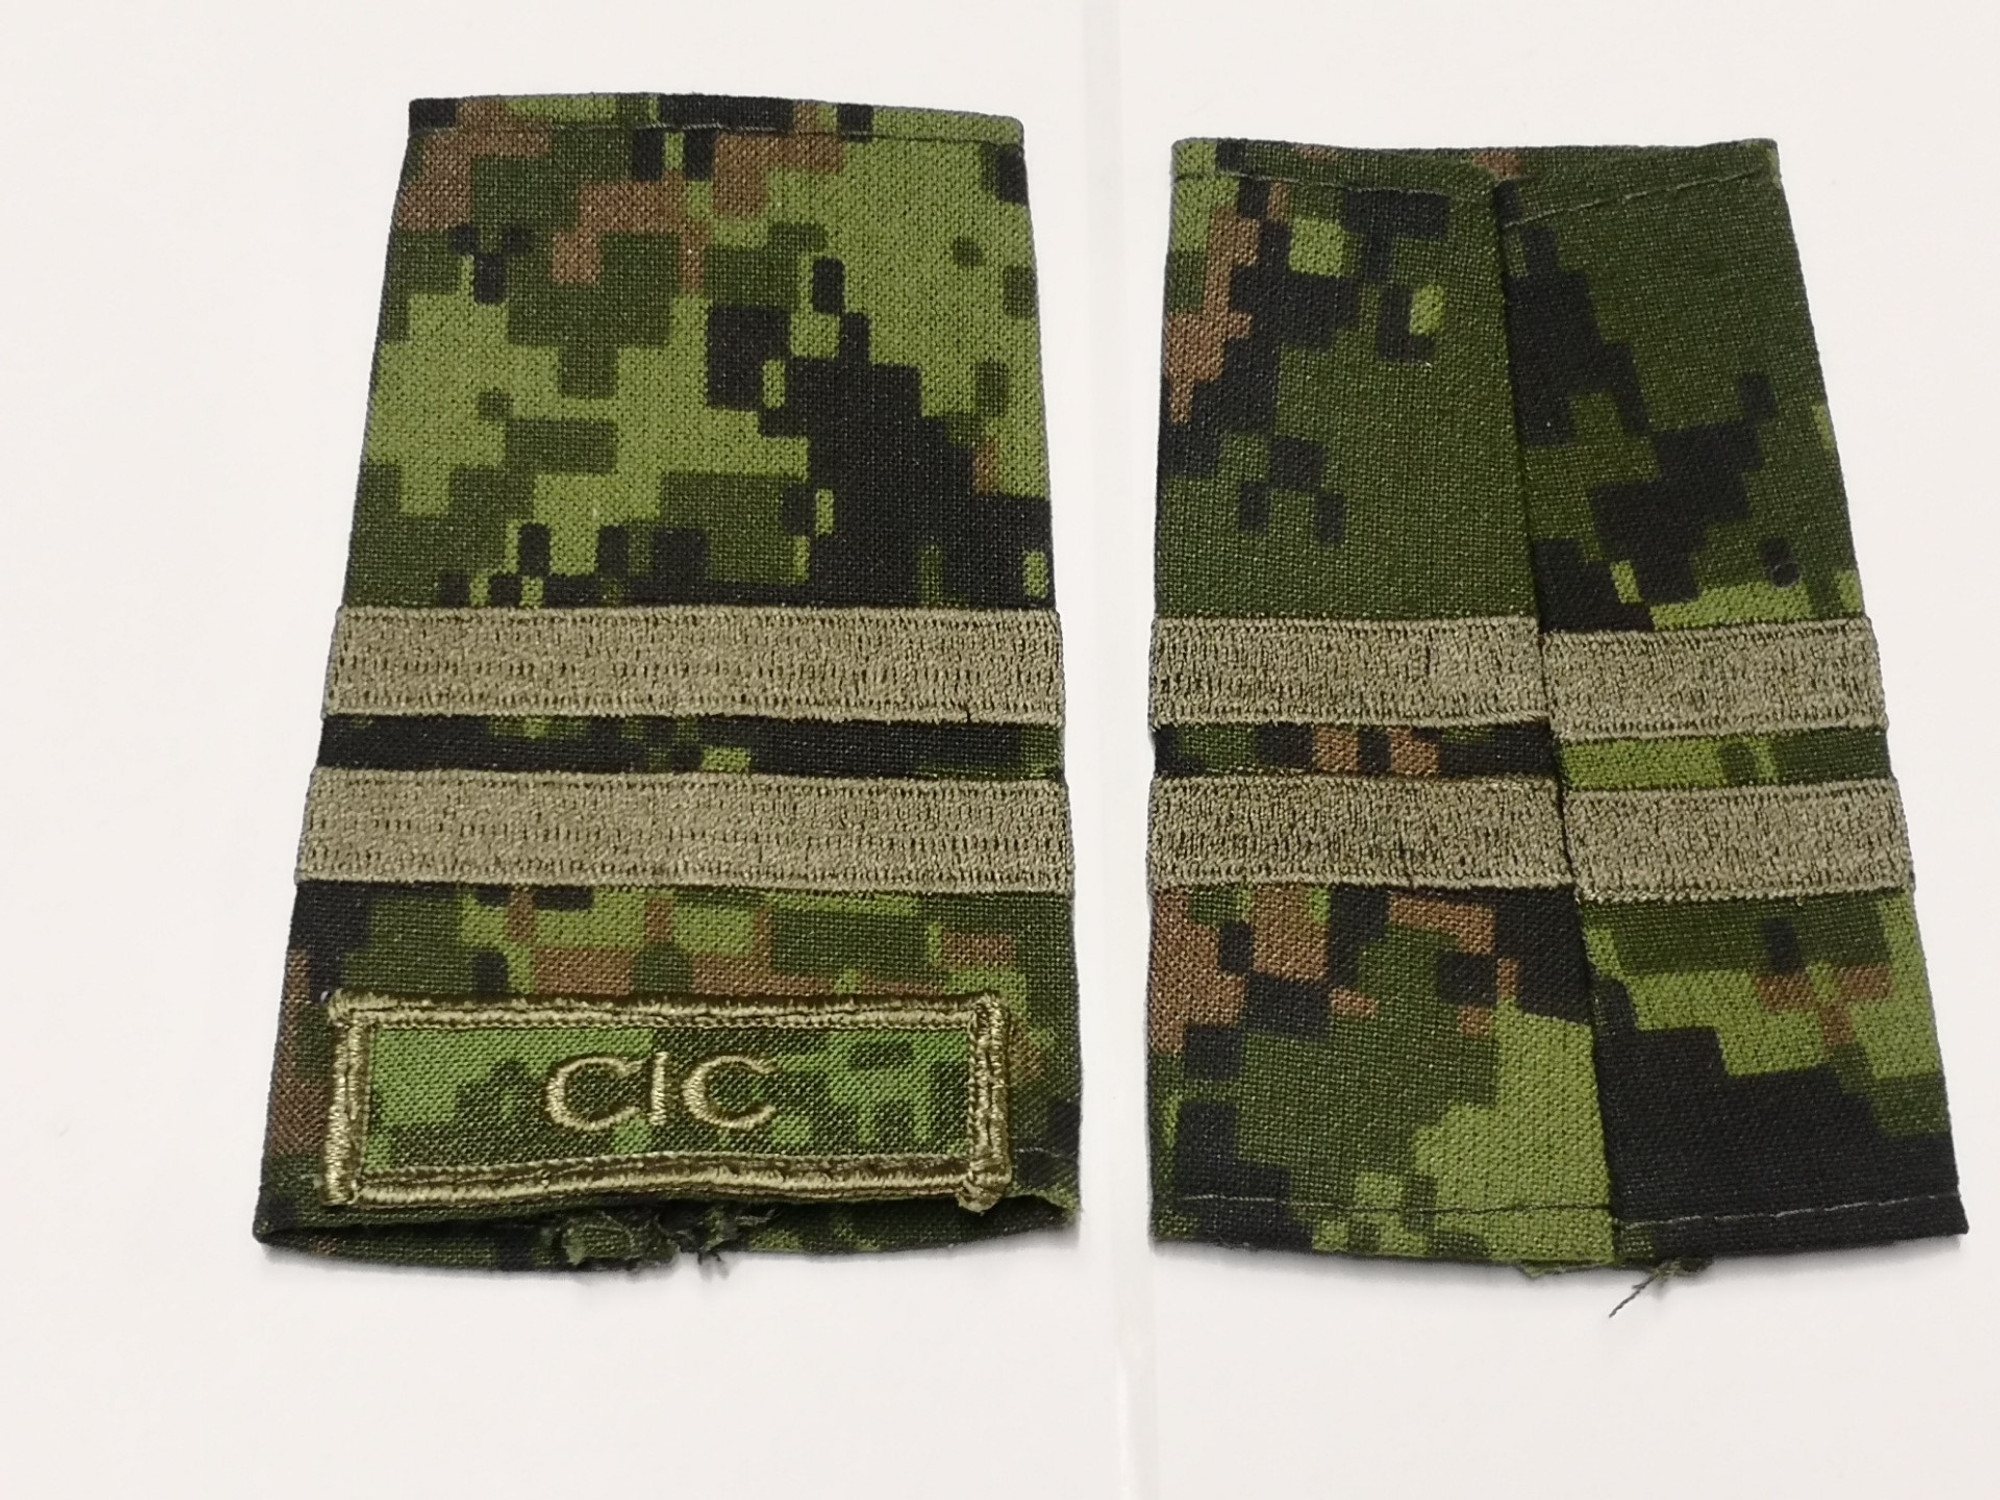 Canadian Armed Forces Cadpat Rank Epaulets CIC - Captain